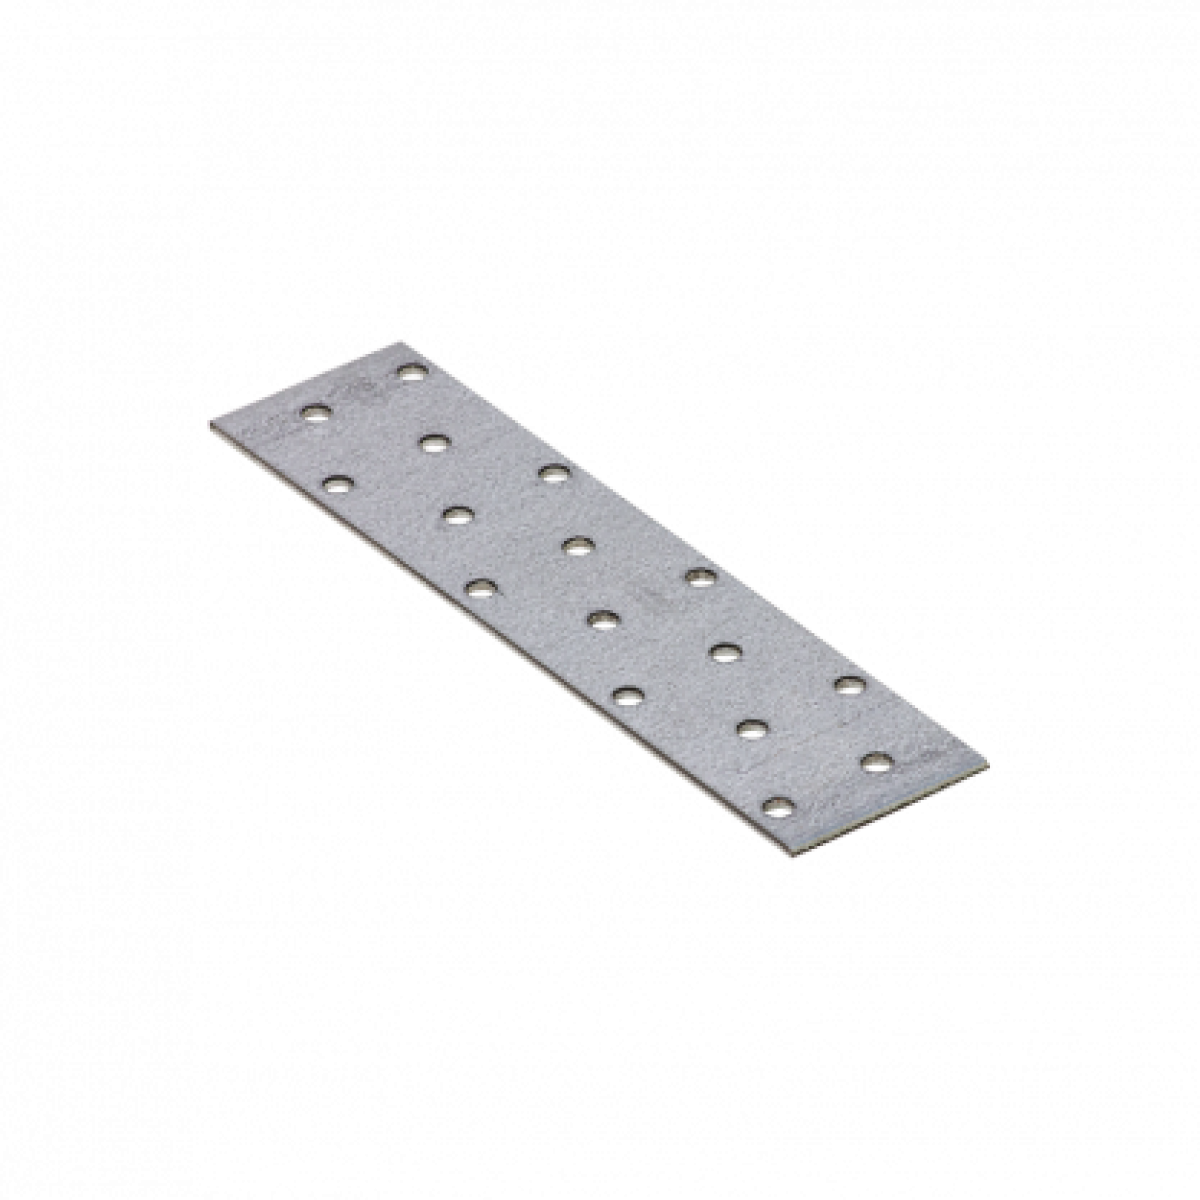 Heavy Duty Straight Perforated Flat Bracket,  Join Plate Mendin Nail Plate bracket PP1 80x40x2,0 mm